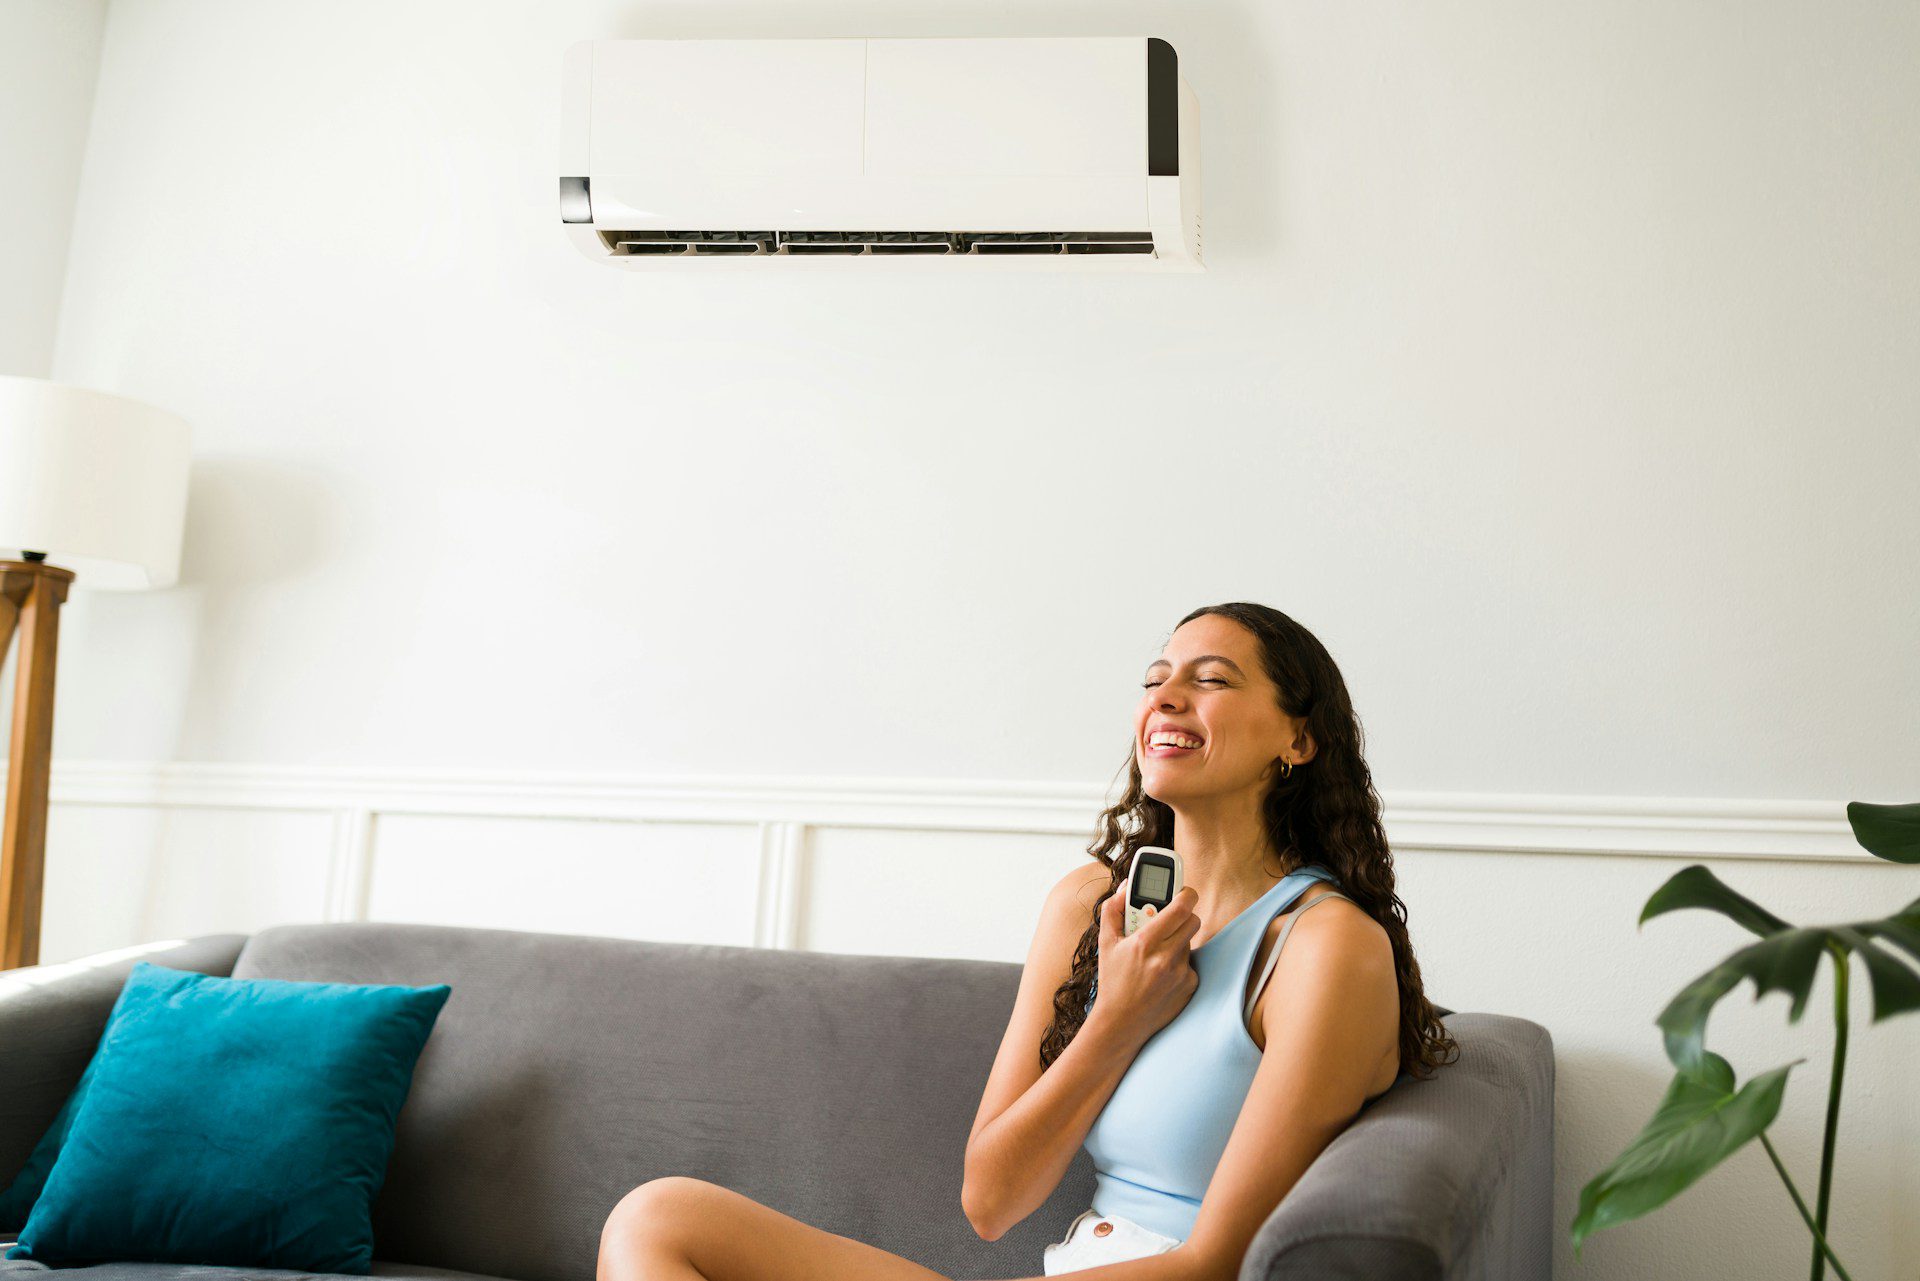 HVAC Systems for Home